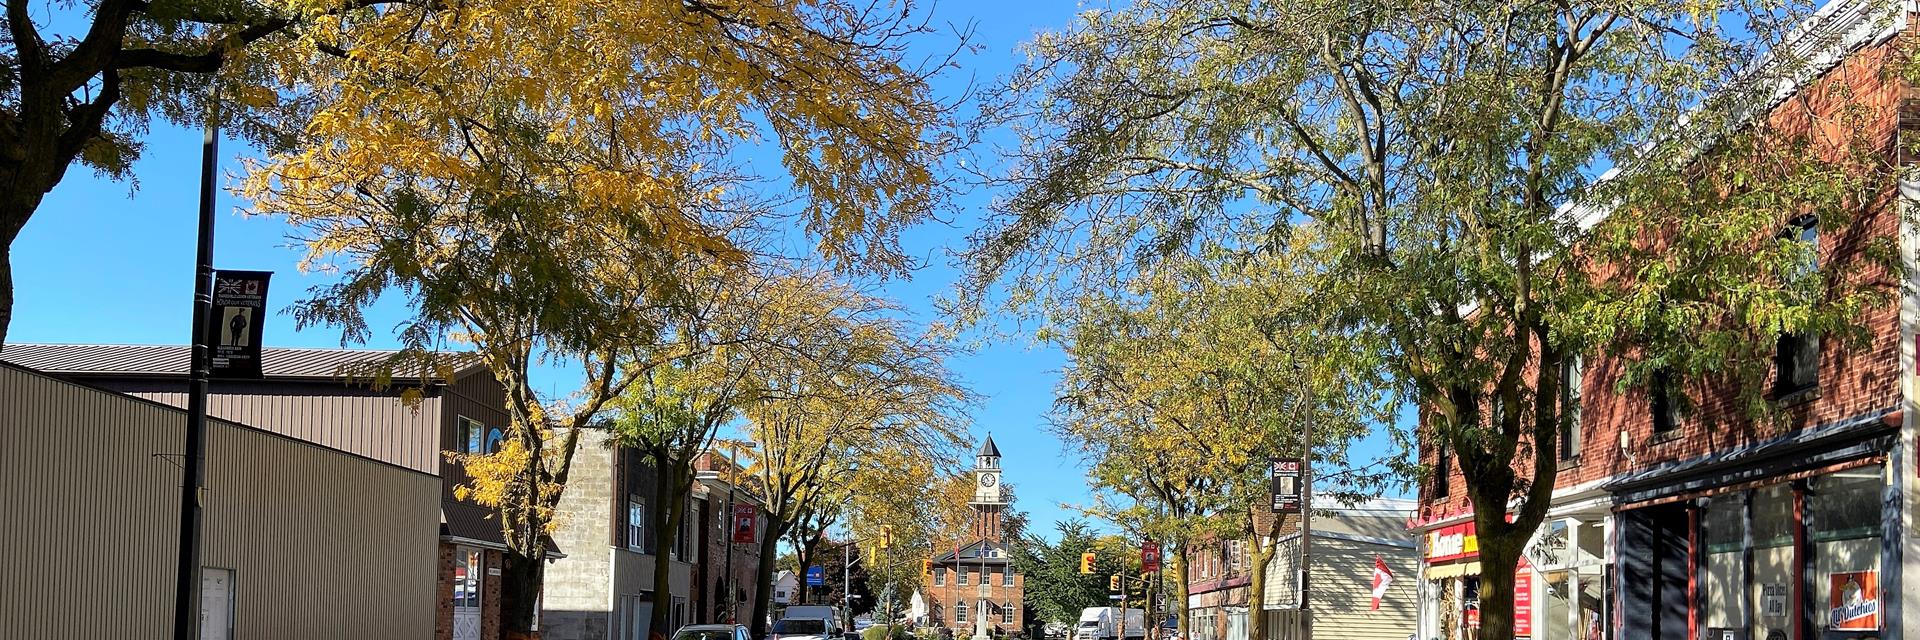 A main street lined by trees with a historical clock tower building at the end of the street.